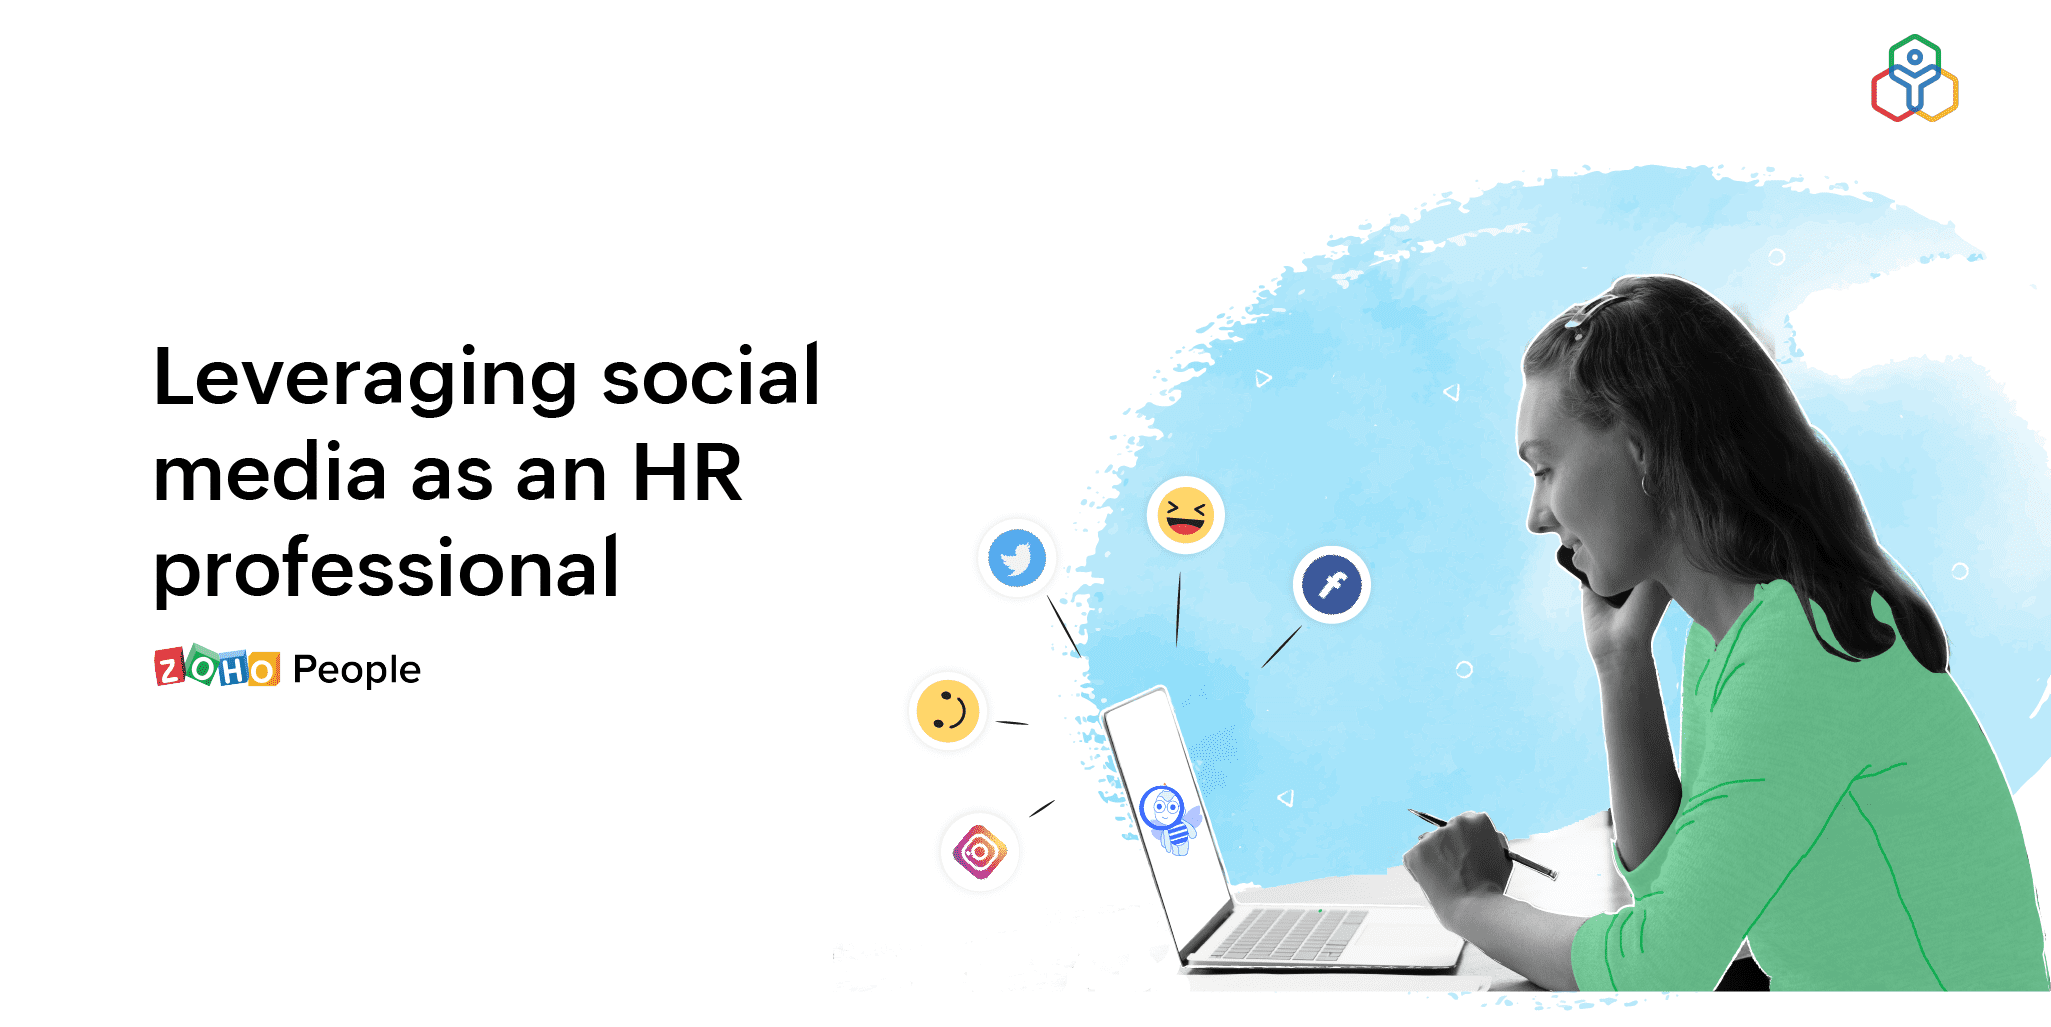 Leveraging social media as an HR professional